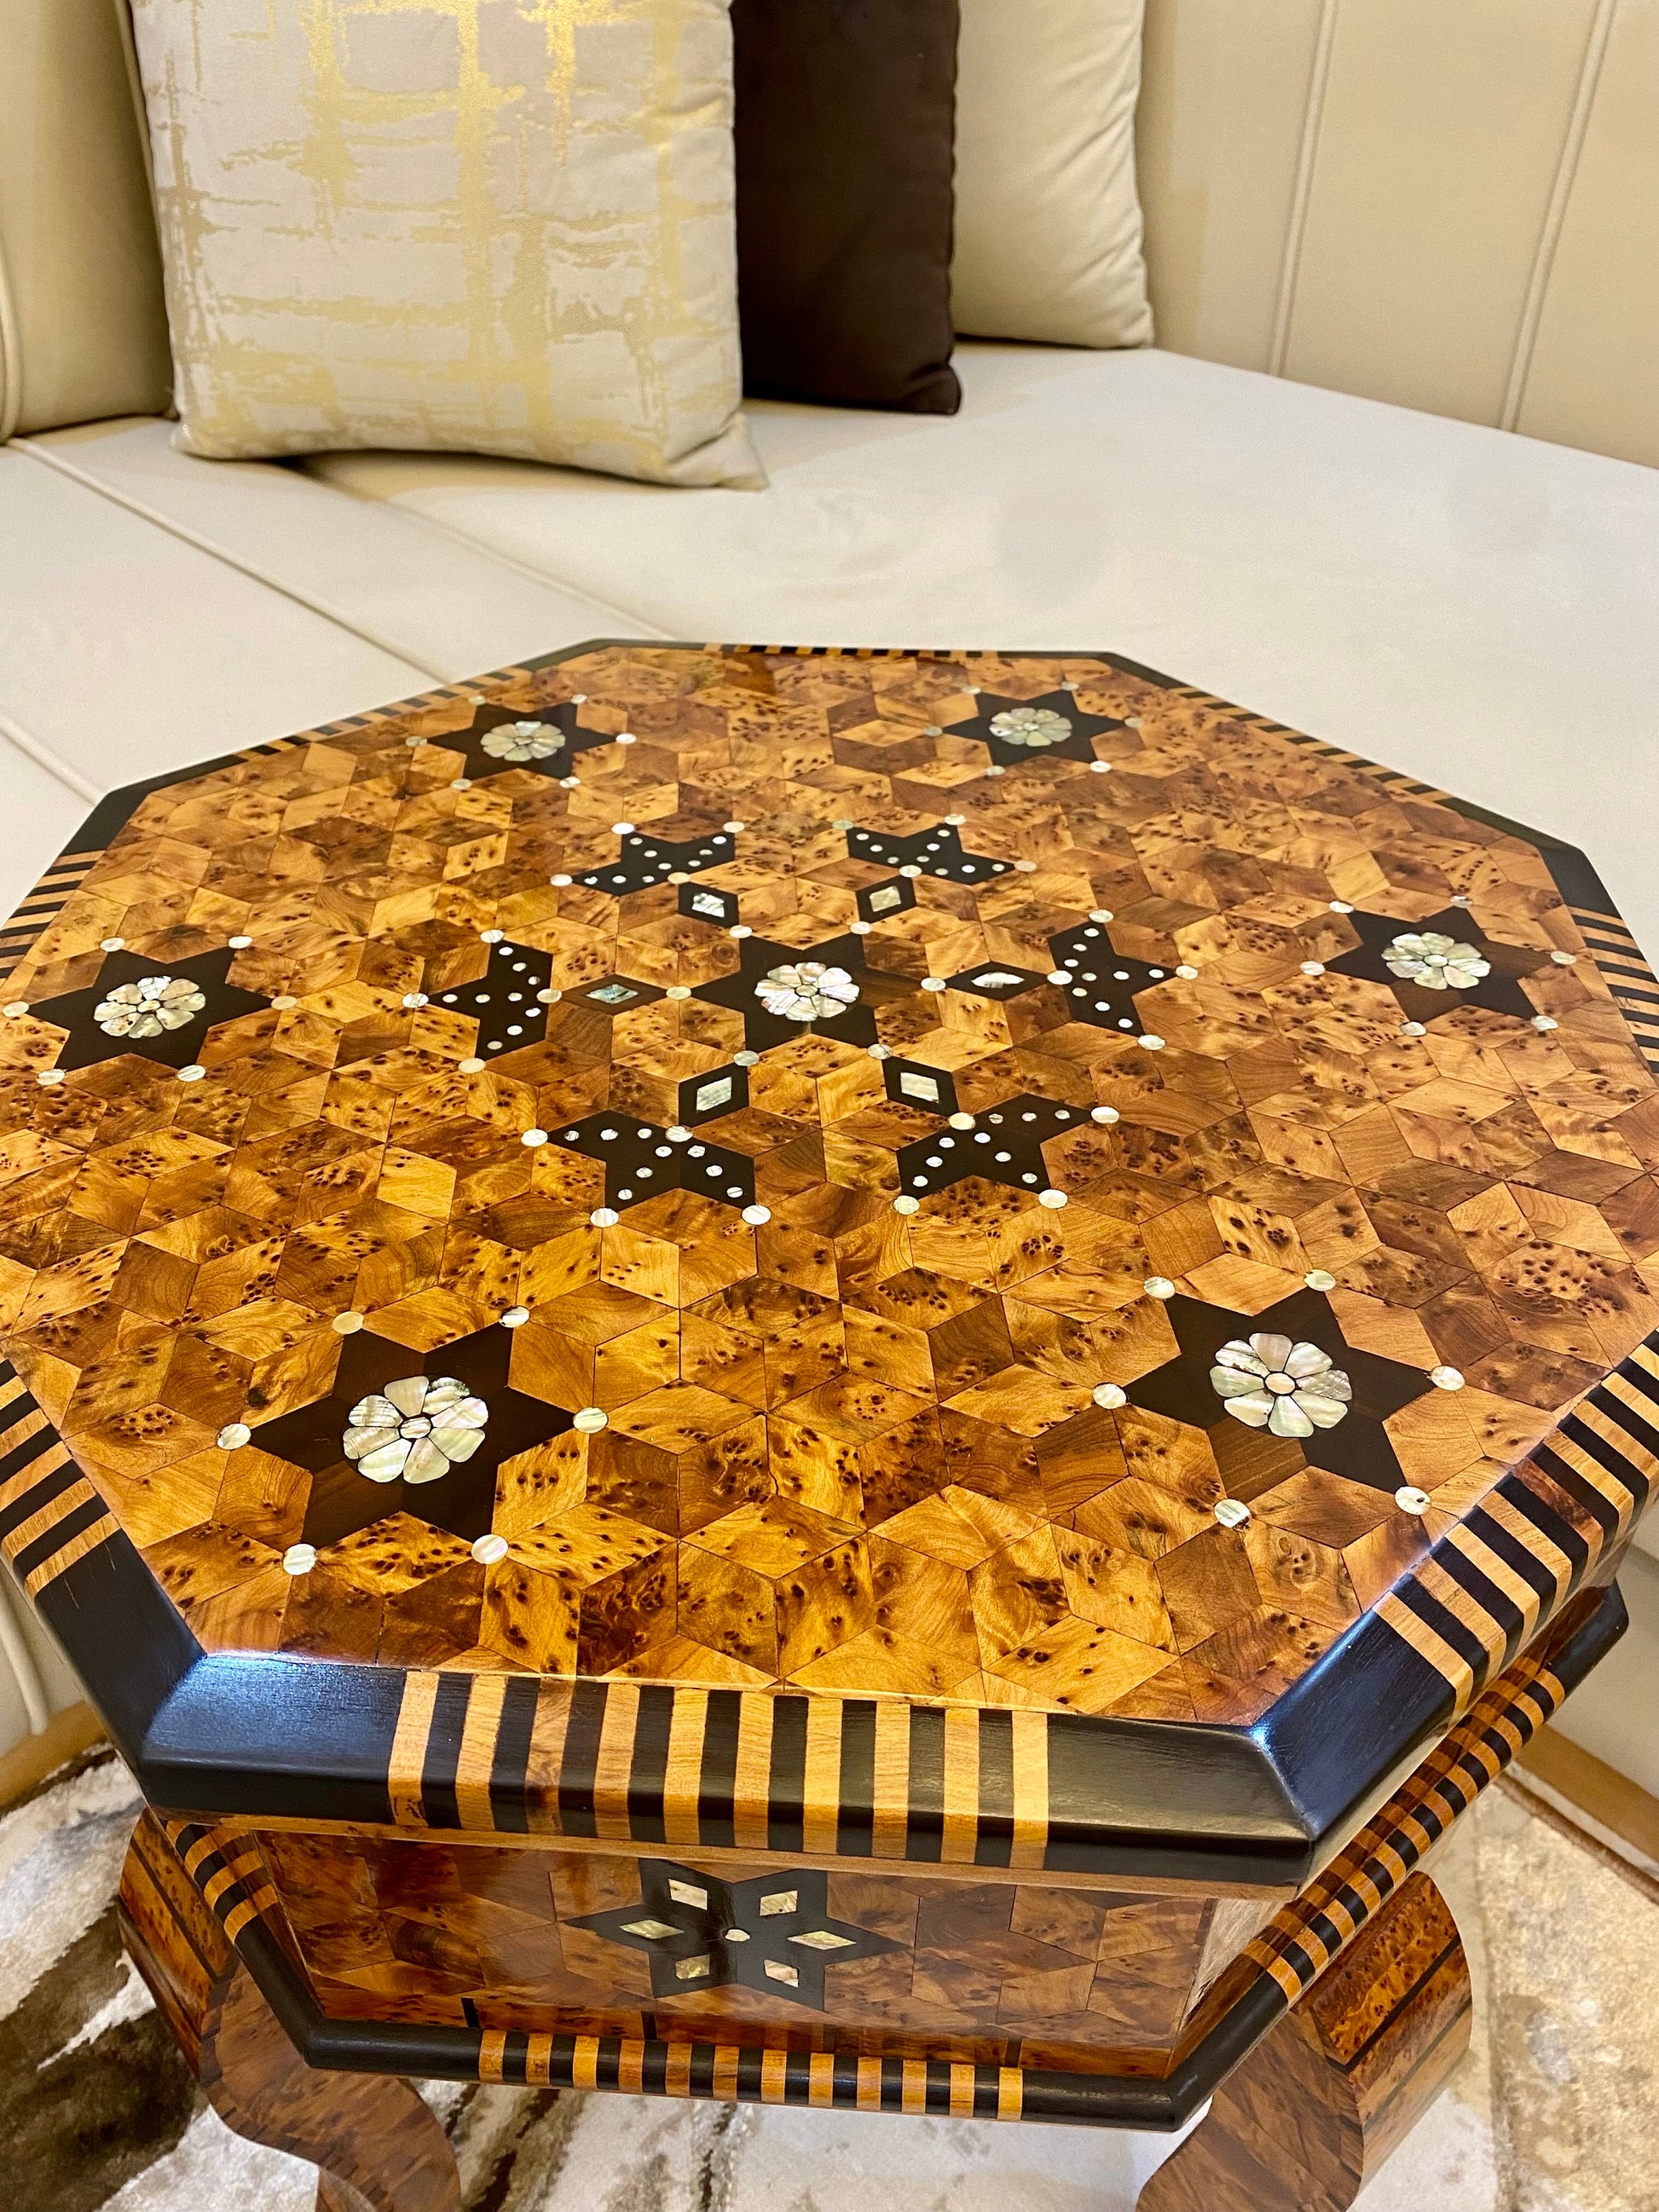 19"x19" Handmade Moroccan Hexagonal Mosaic Thuya Wood Table with mother of pearls and burned lemon wood Inlay,unique home decor living room